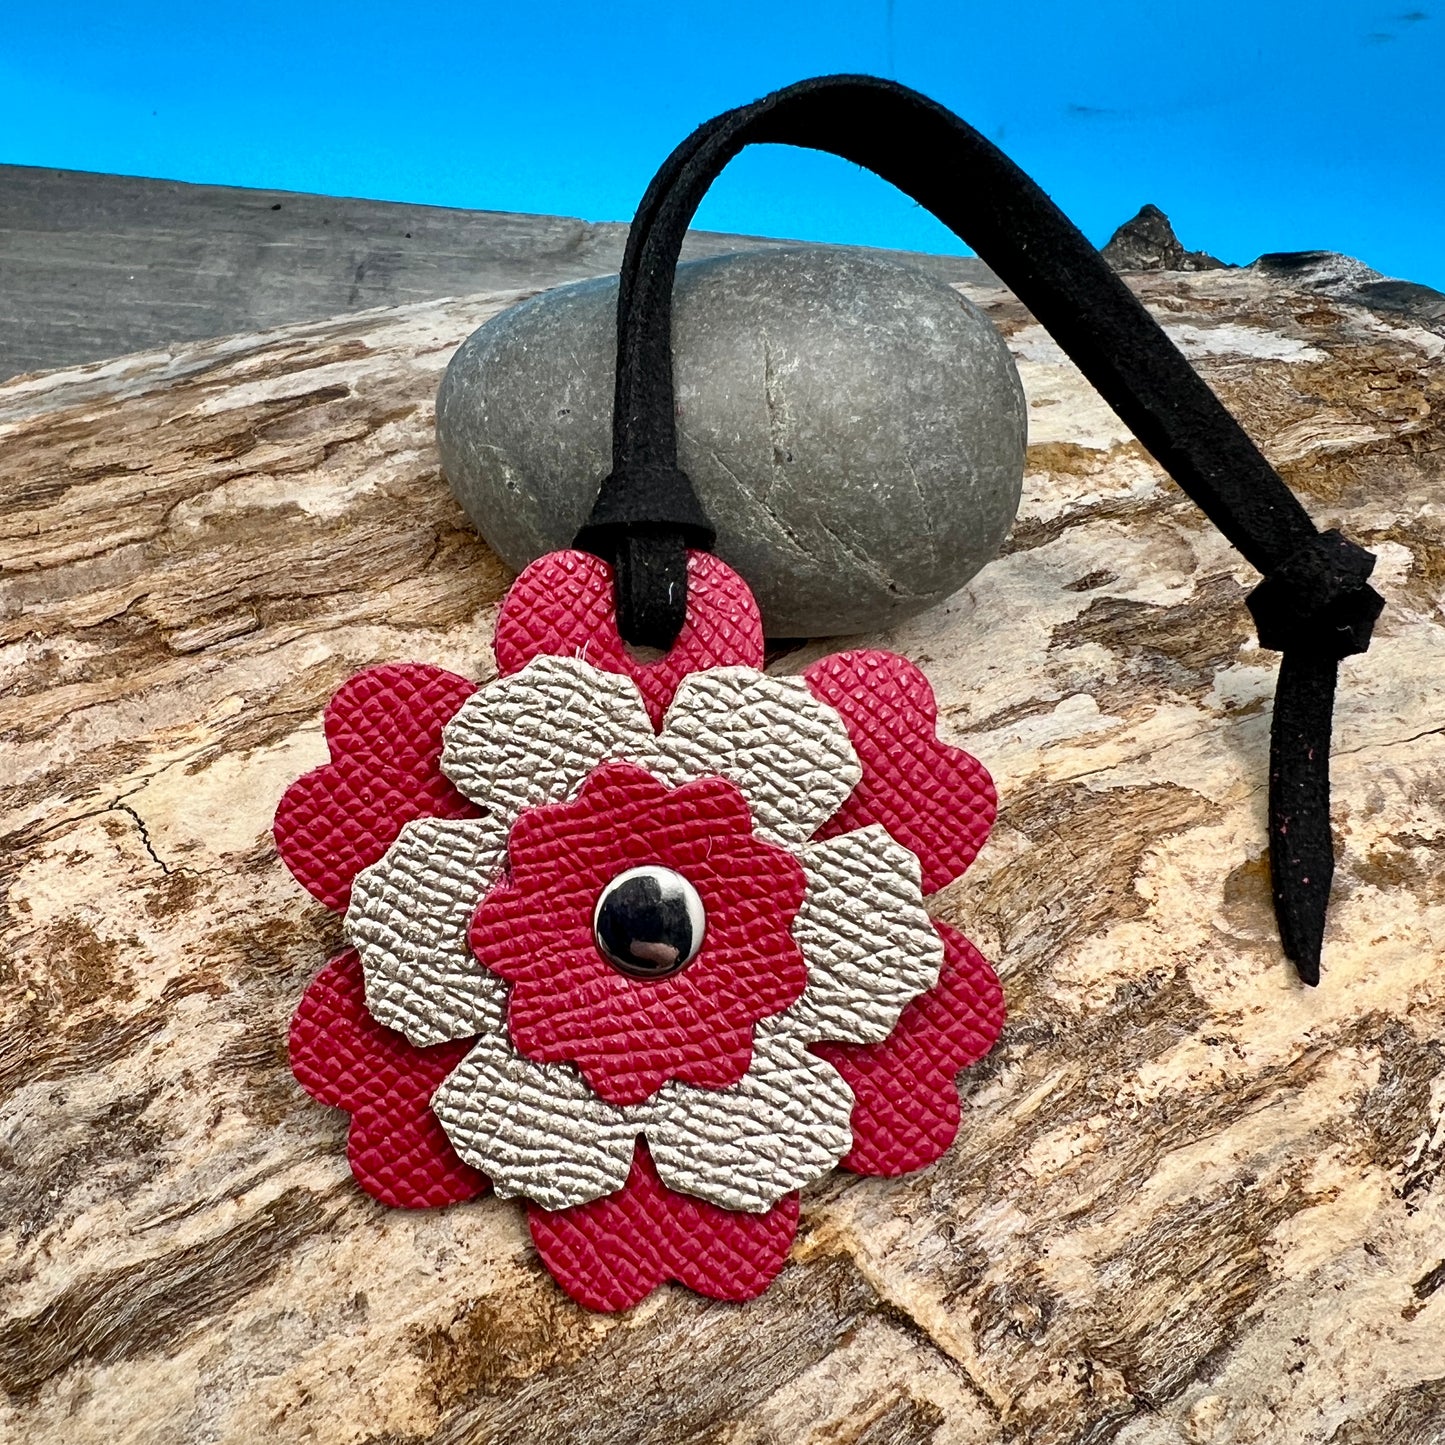 Small Leather Flower Purse Charm -  Berry Pink and Rose Gold